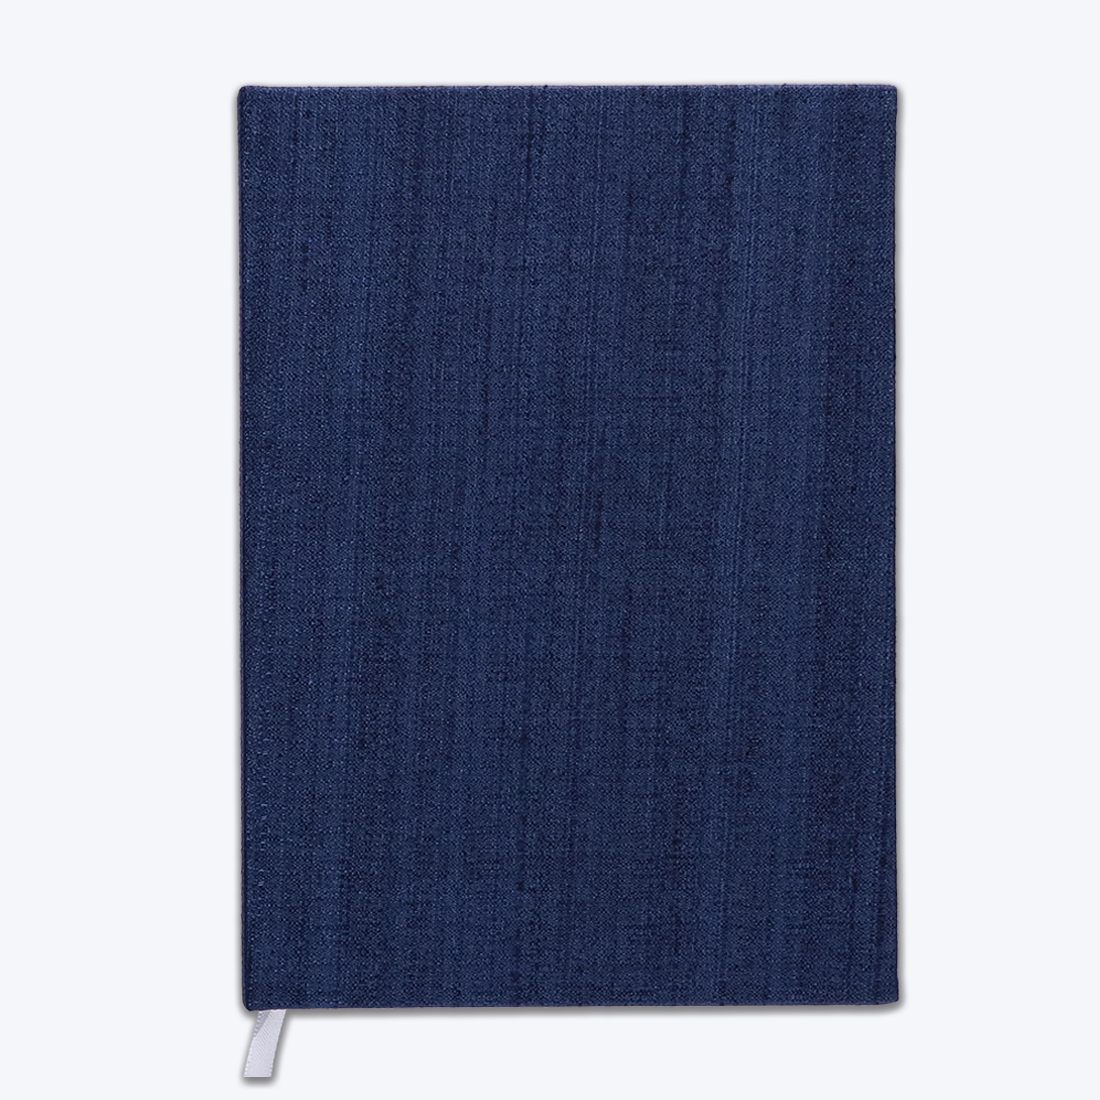 Navneet HQ | Khadi | Actual Khadi fabric cover| Premium colours| Case bound Notebook | Office / Personal stationery | Single Line | A5 Size - 14.8 x 21 CM  | 192 Pages